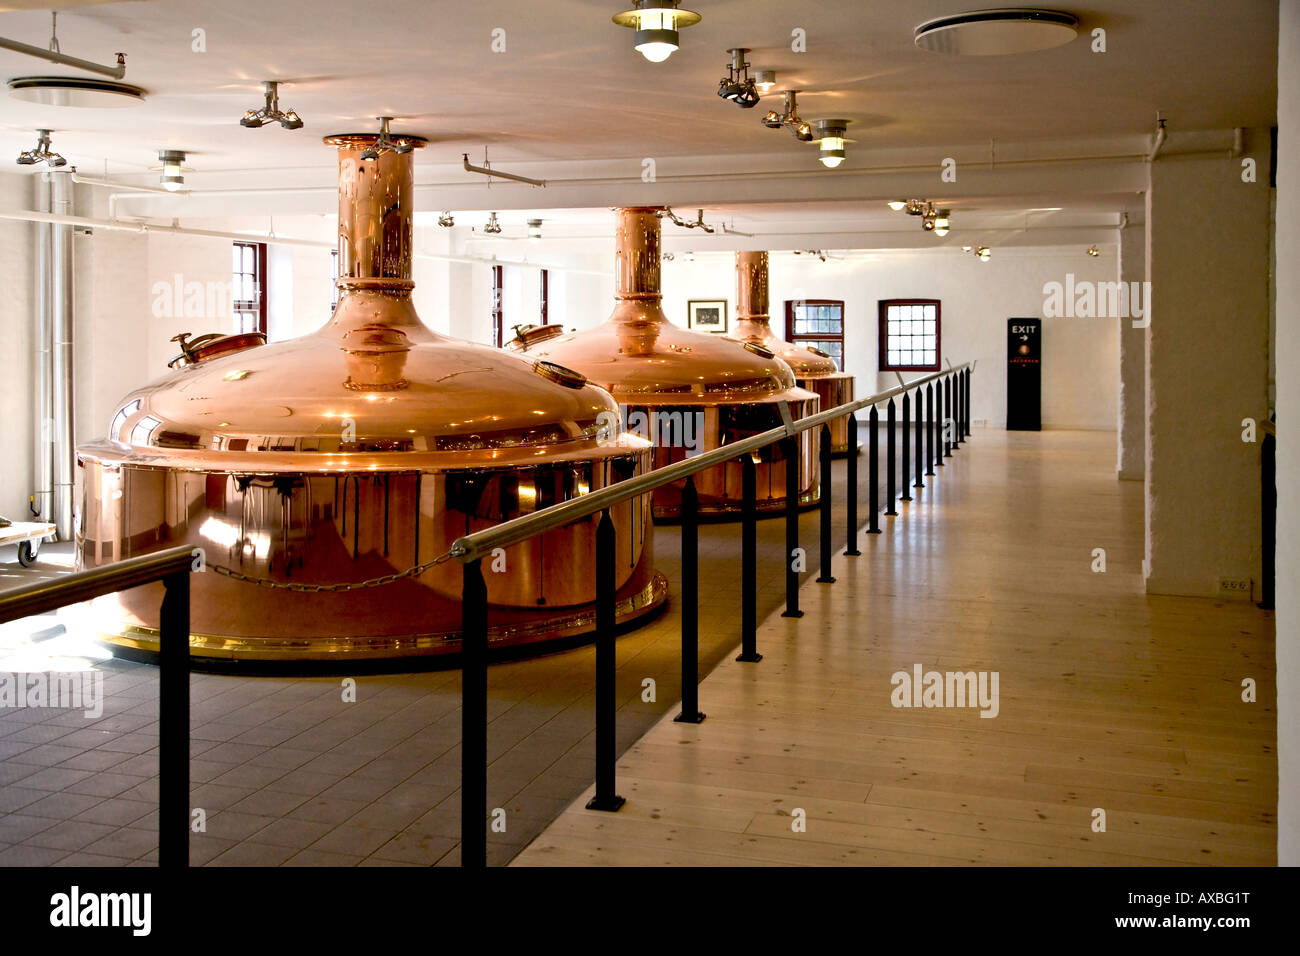 Copper beer brewing tanks Stock Photo